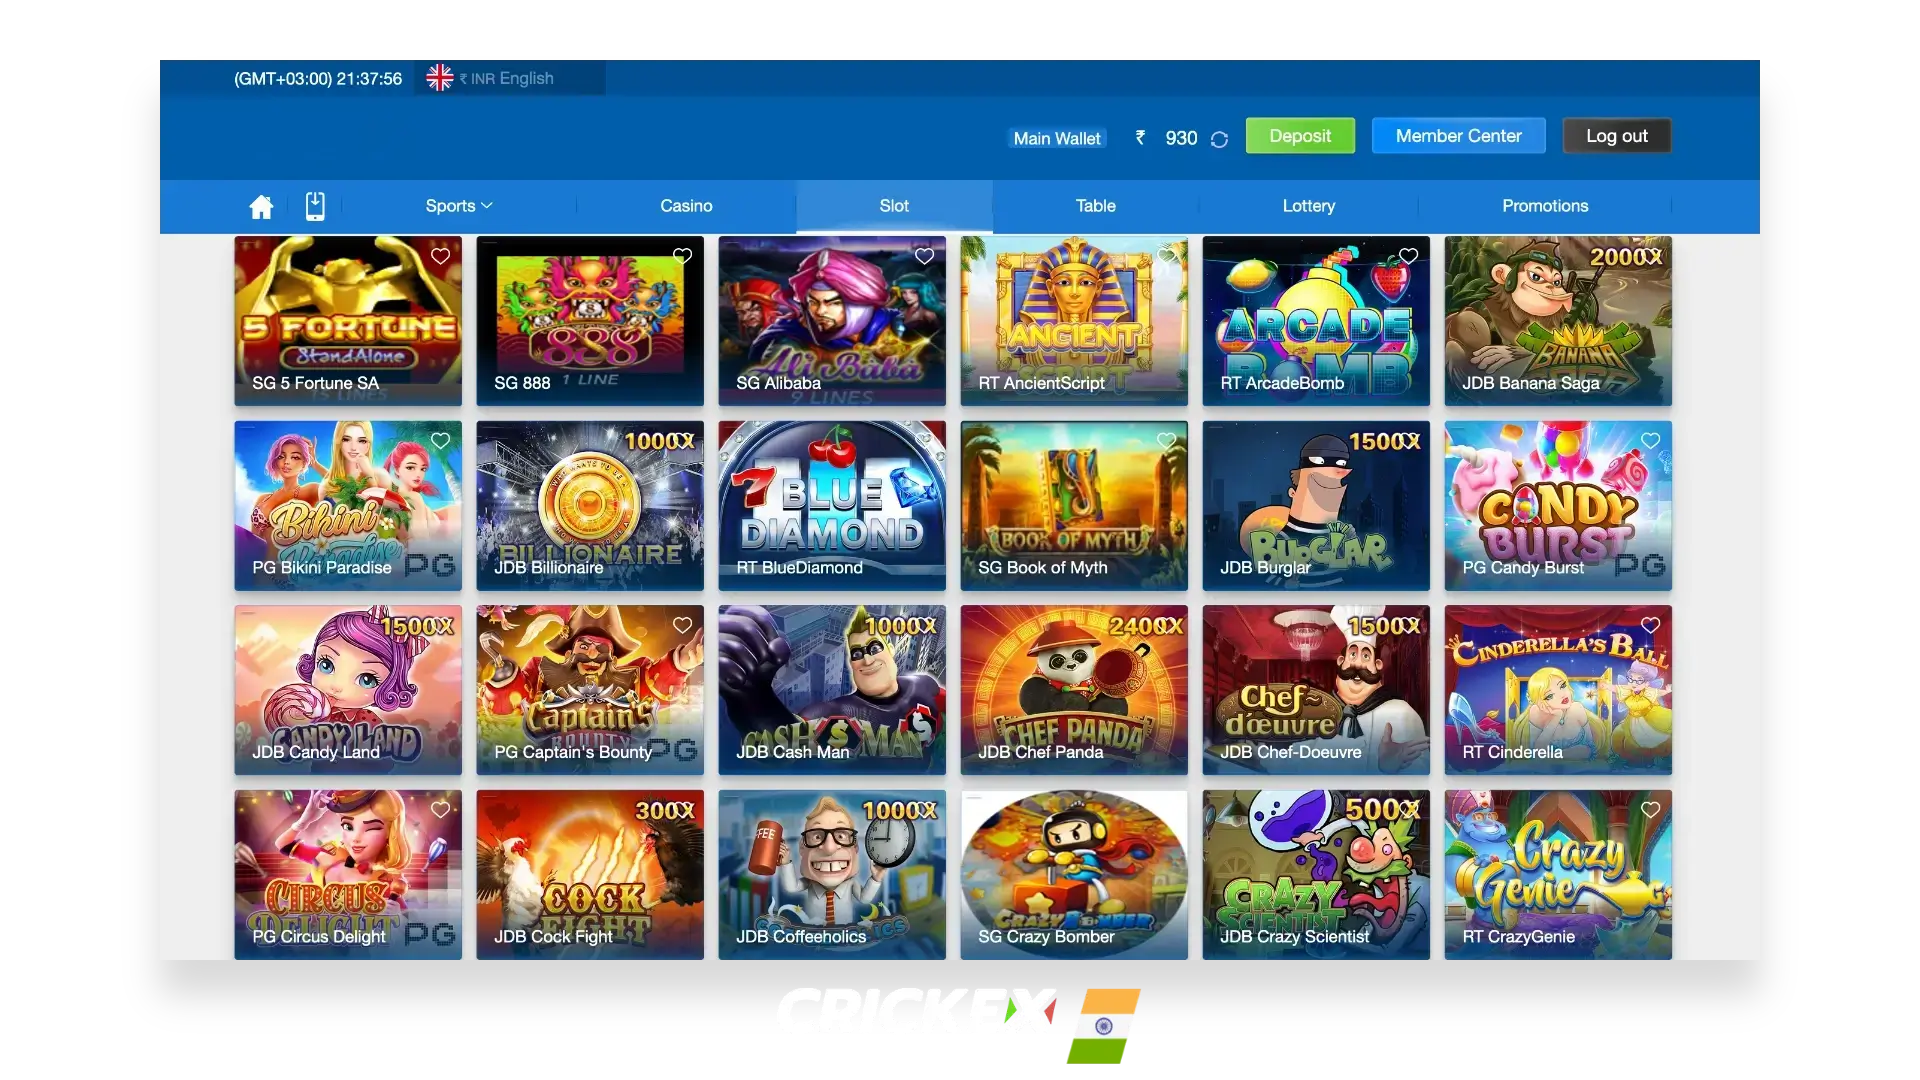 Crickex online casino with hufe selection of popular games